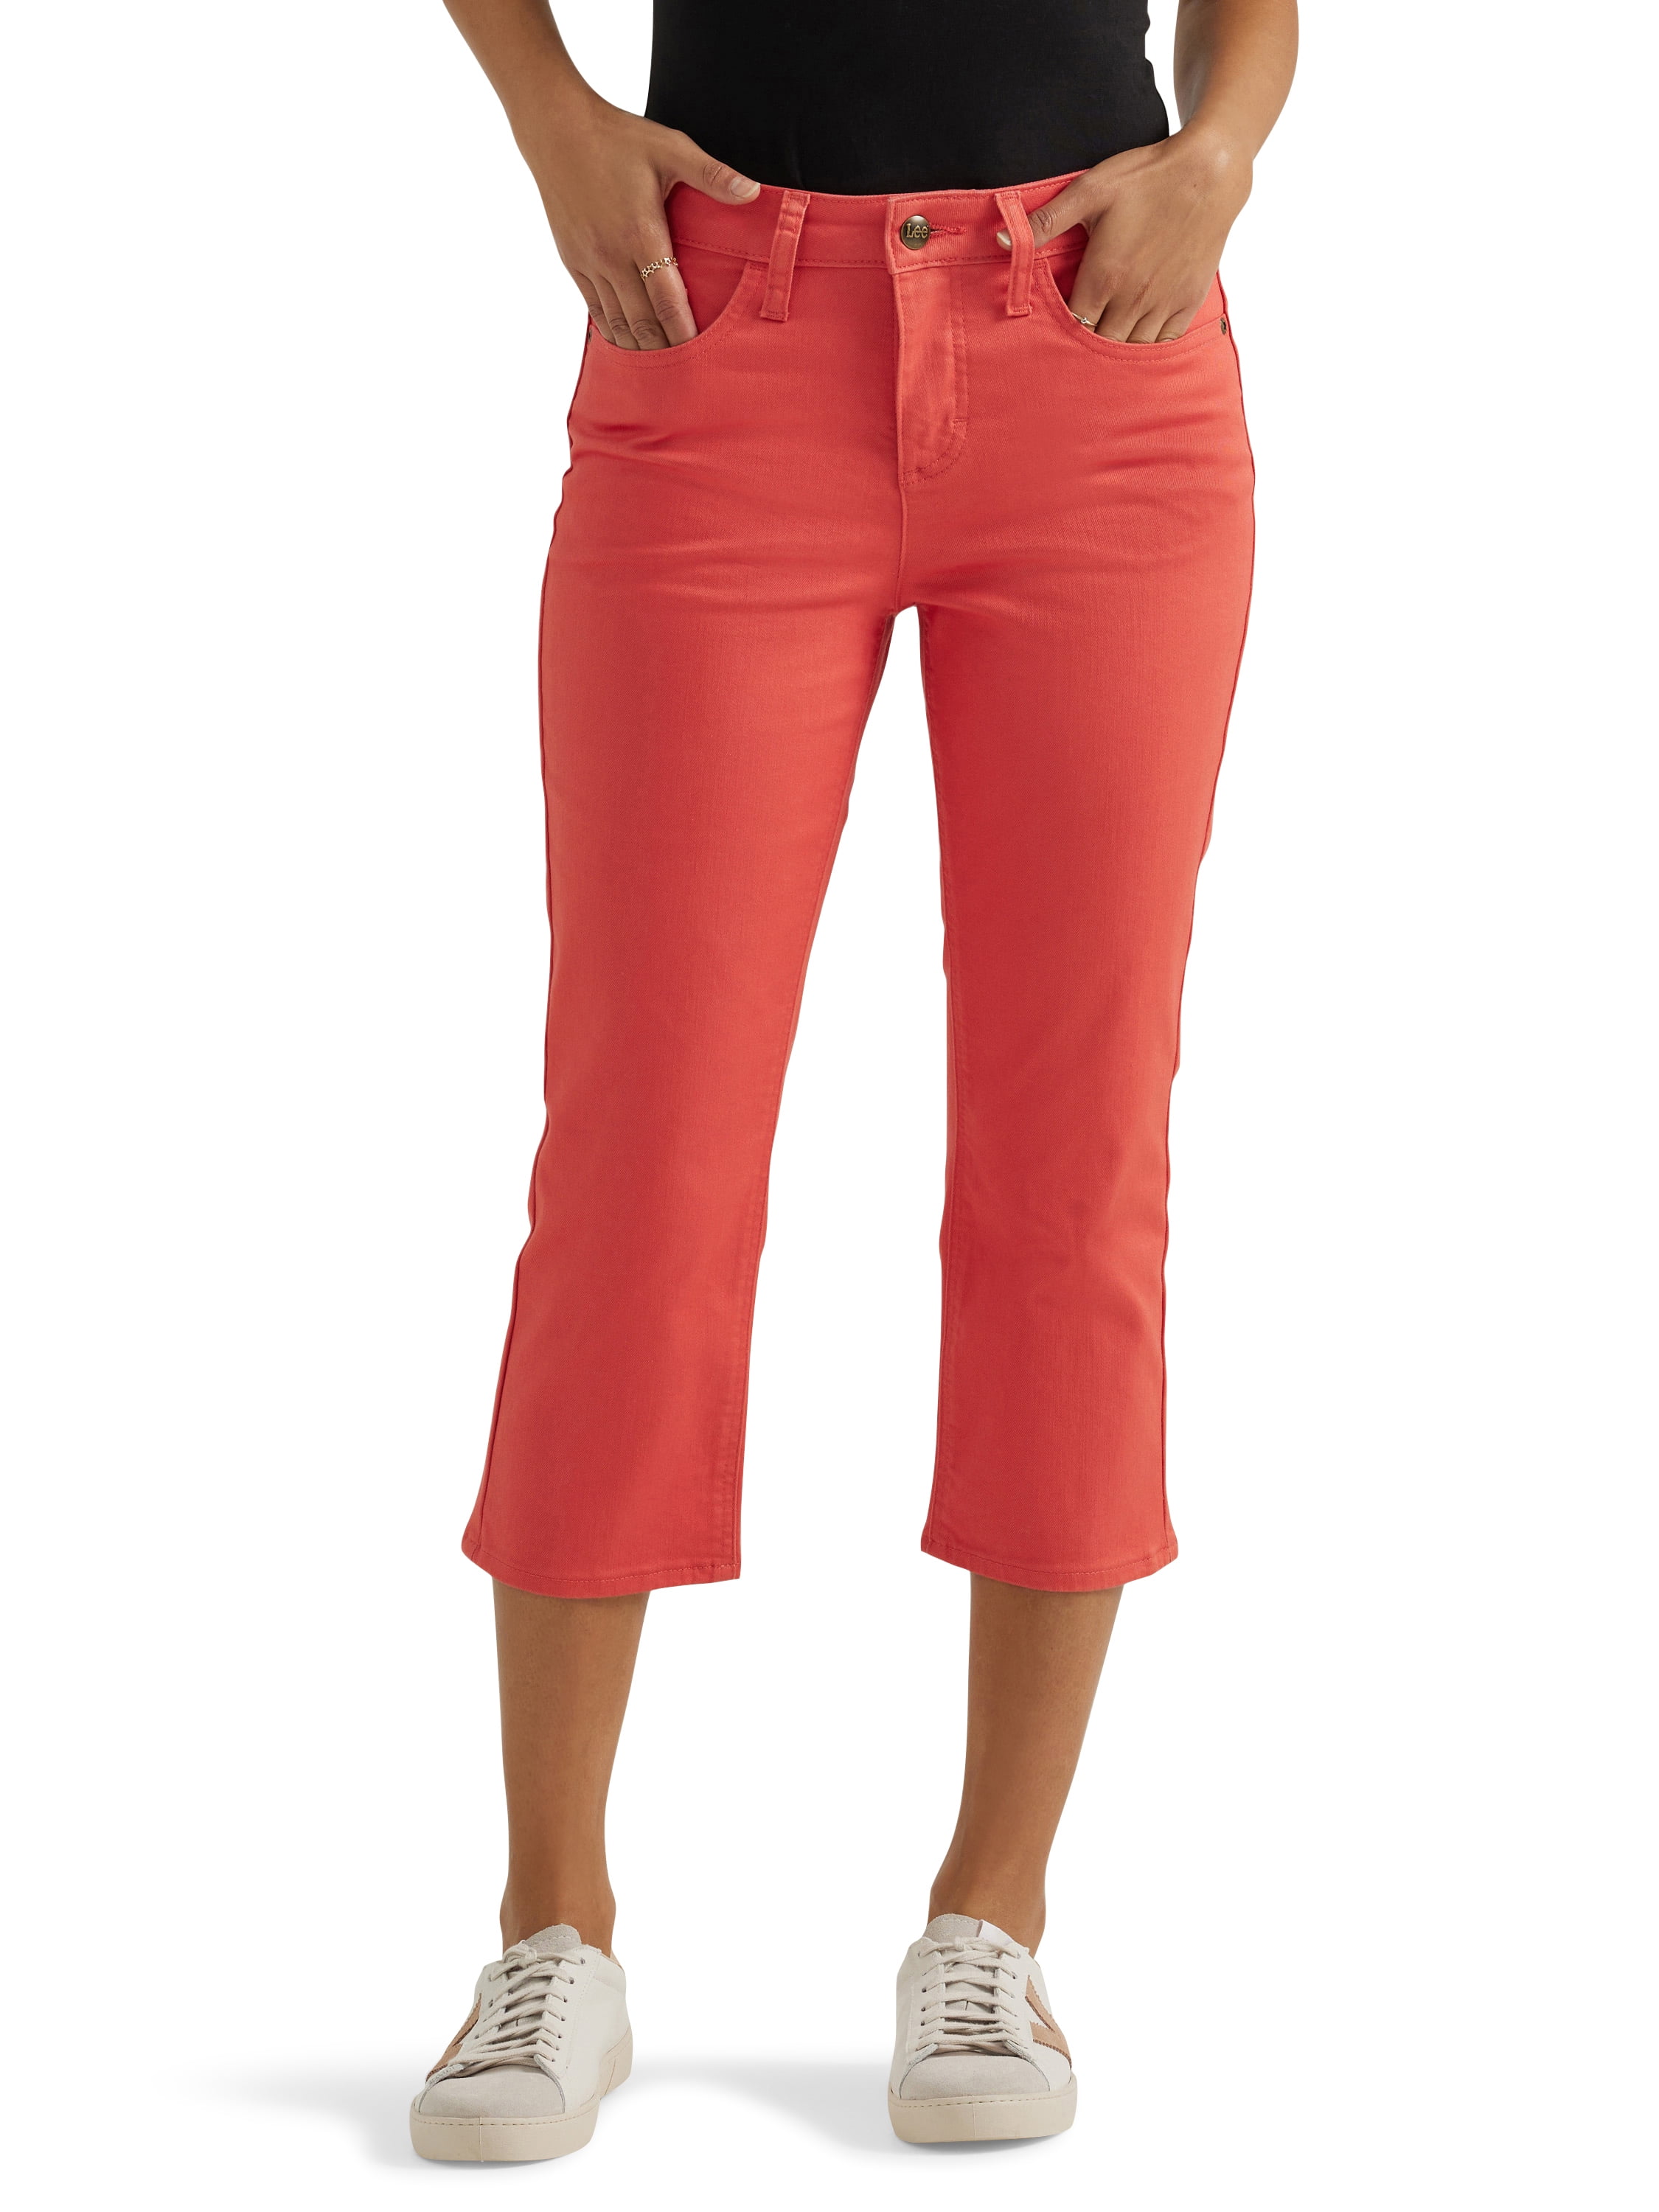 Alfred Dunner Women's Well Red Proportioned Short Denim Pants